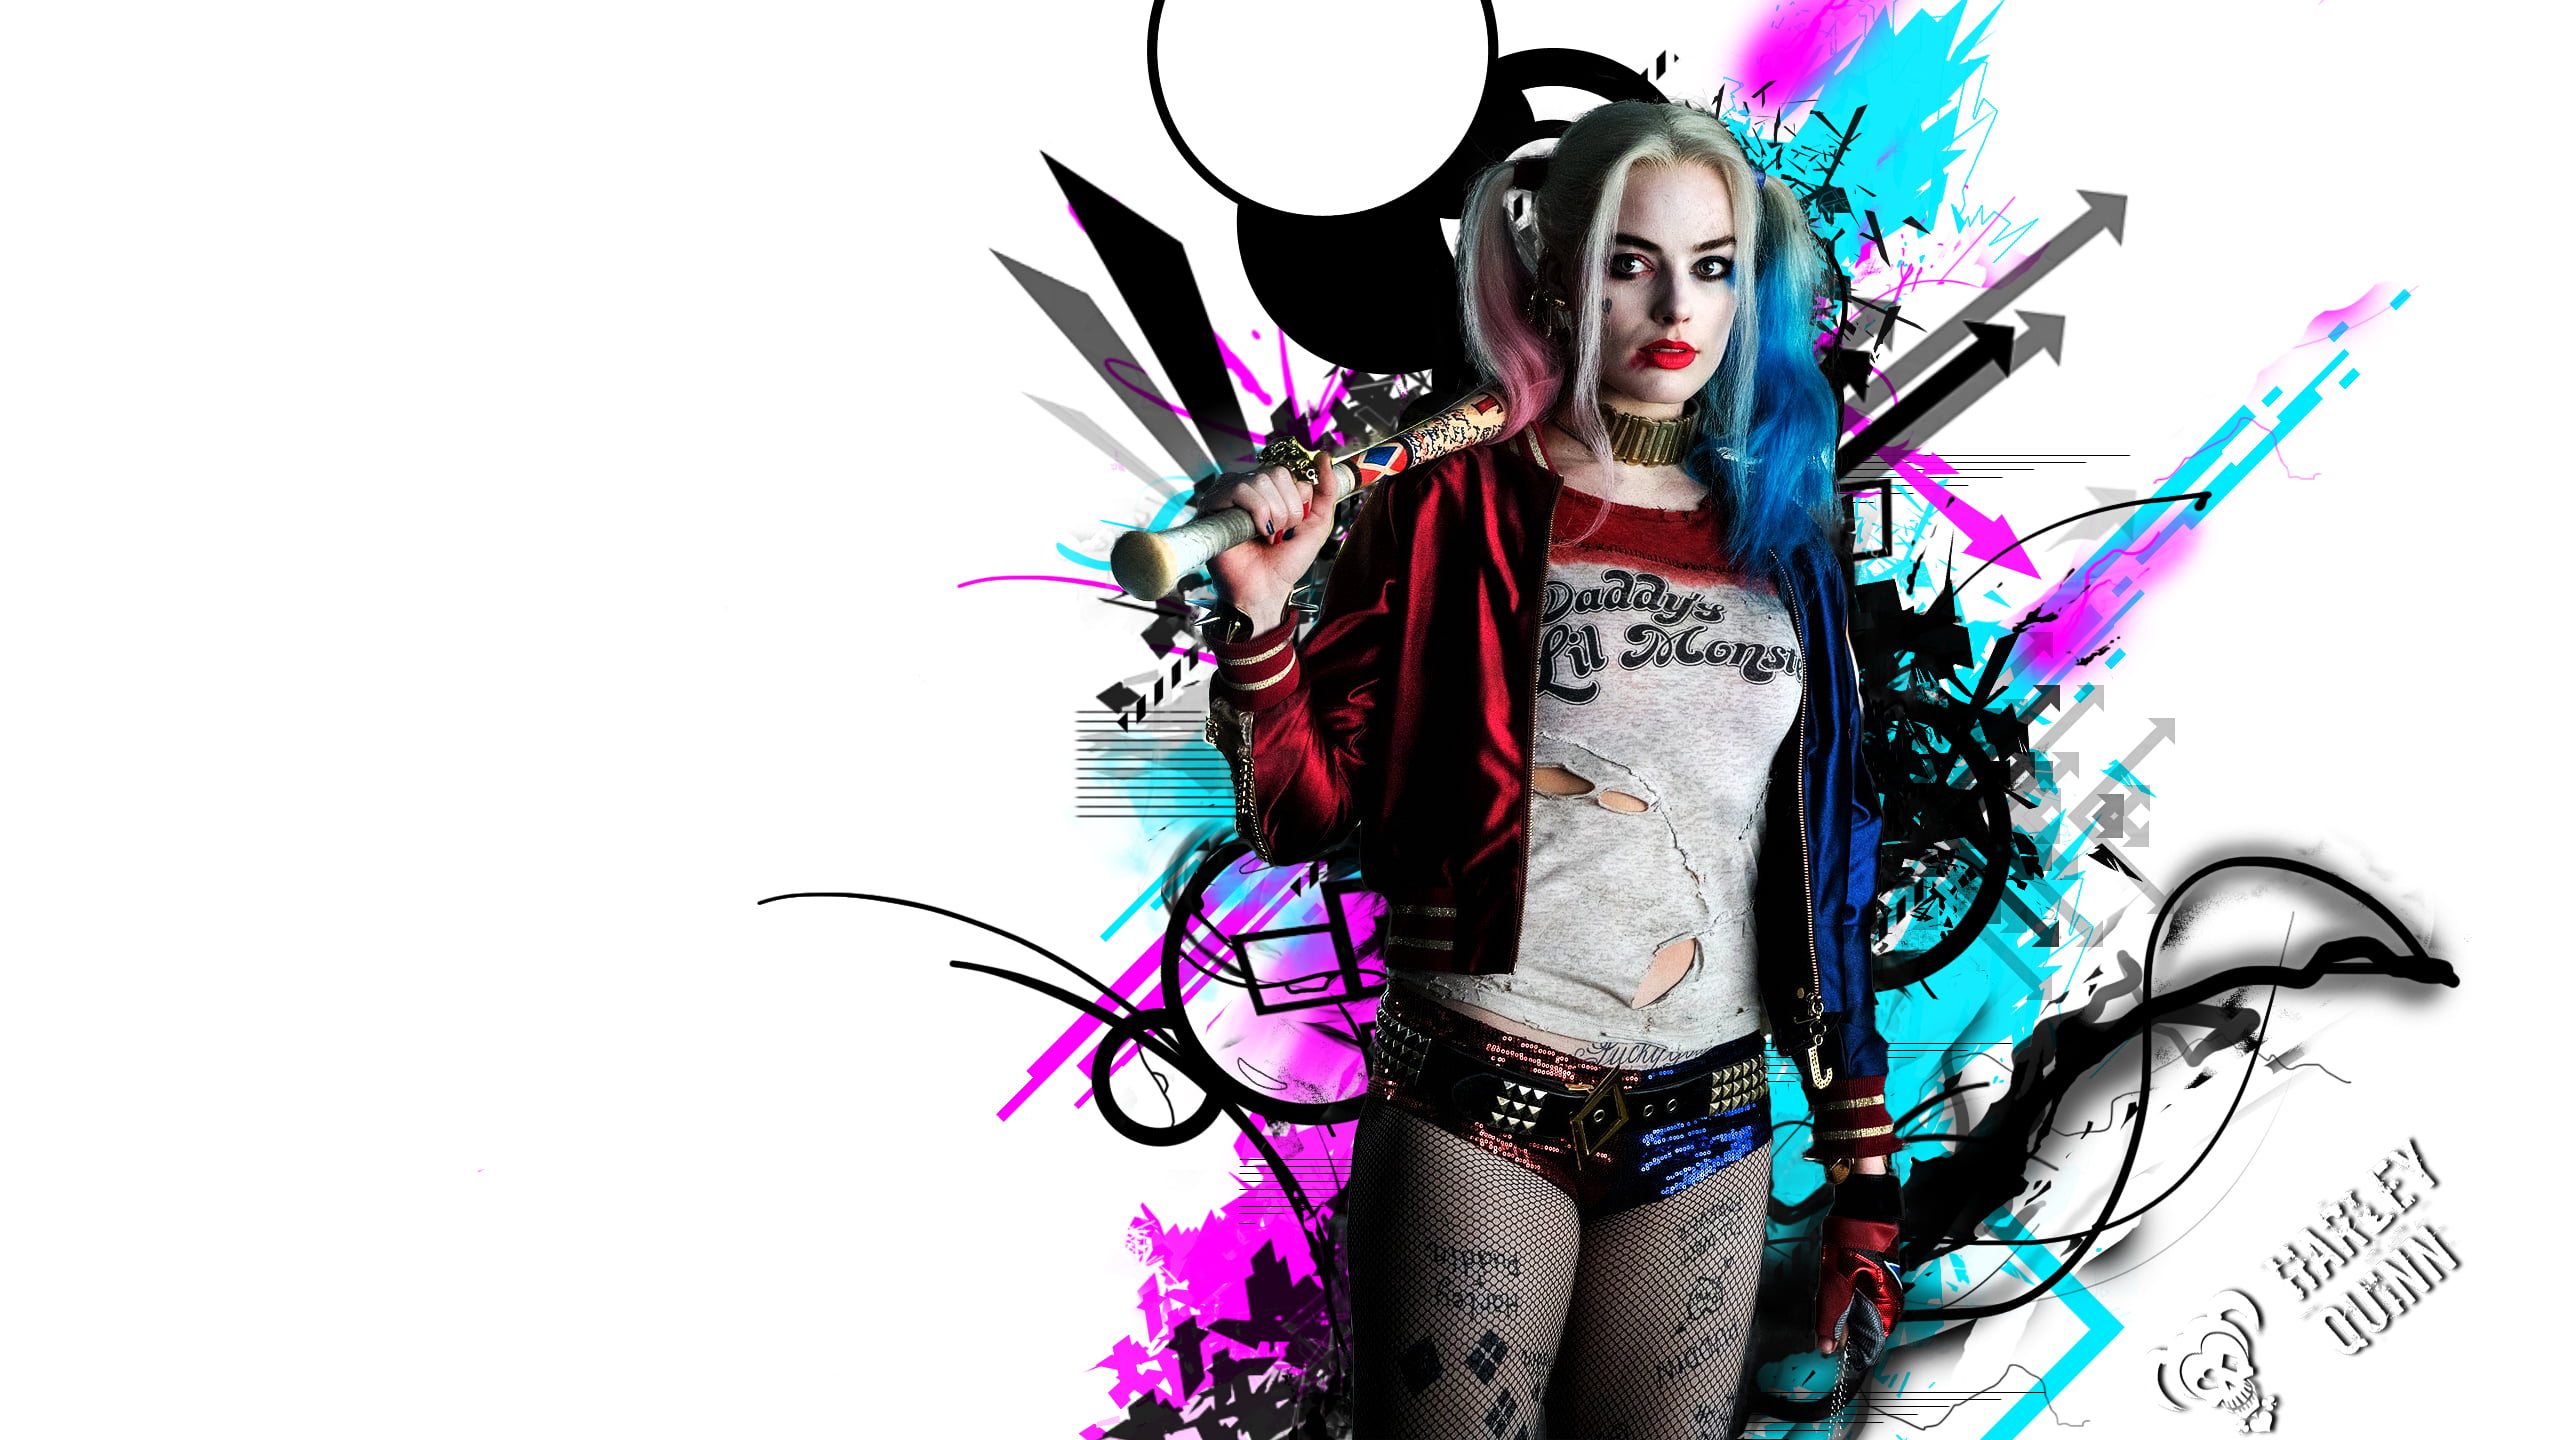 suicide squad, movies, 2016 movies, harley quinn, art, hd, one person